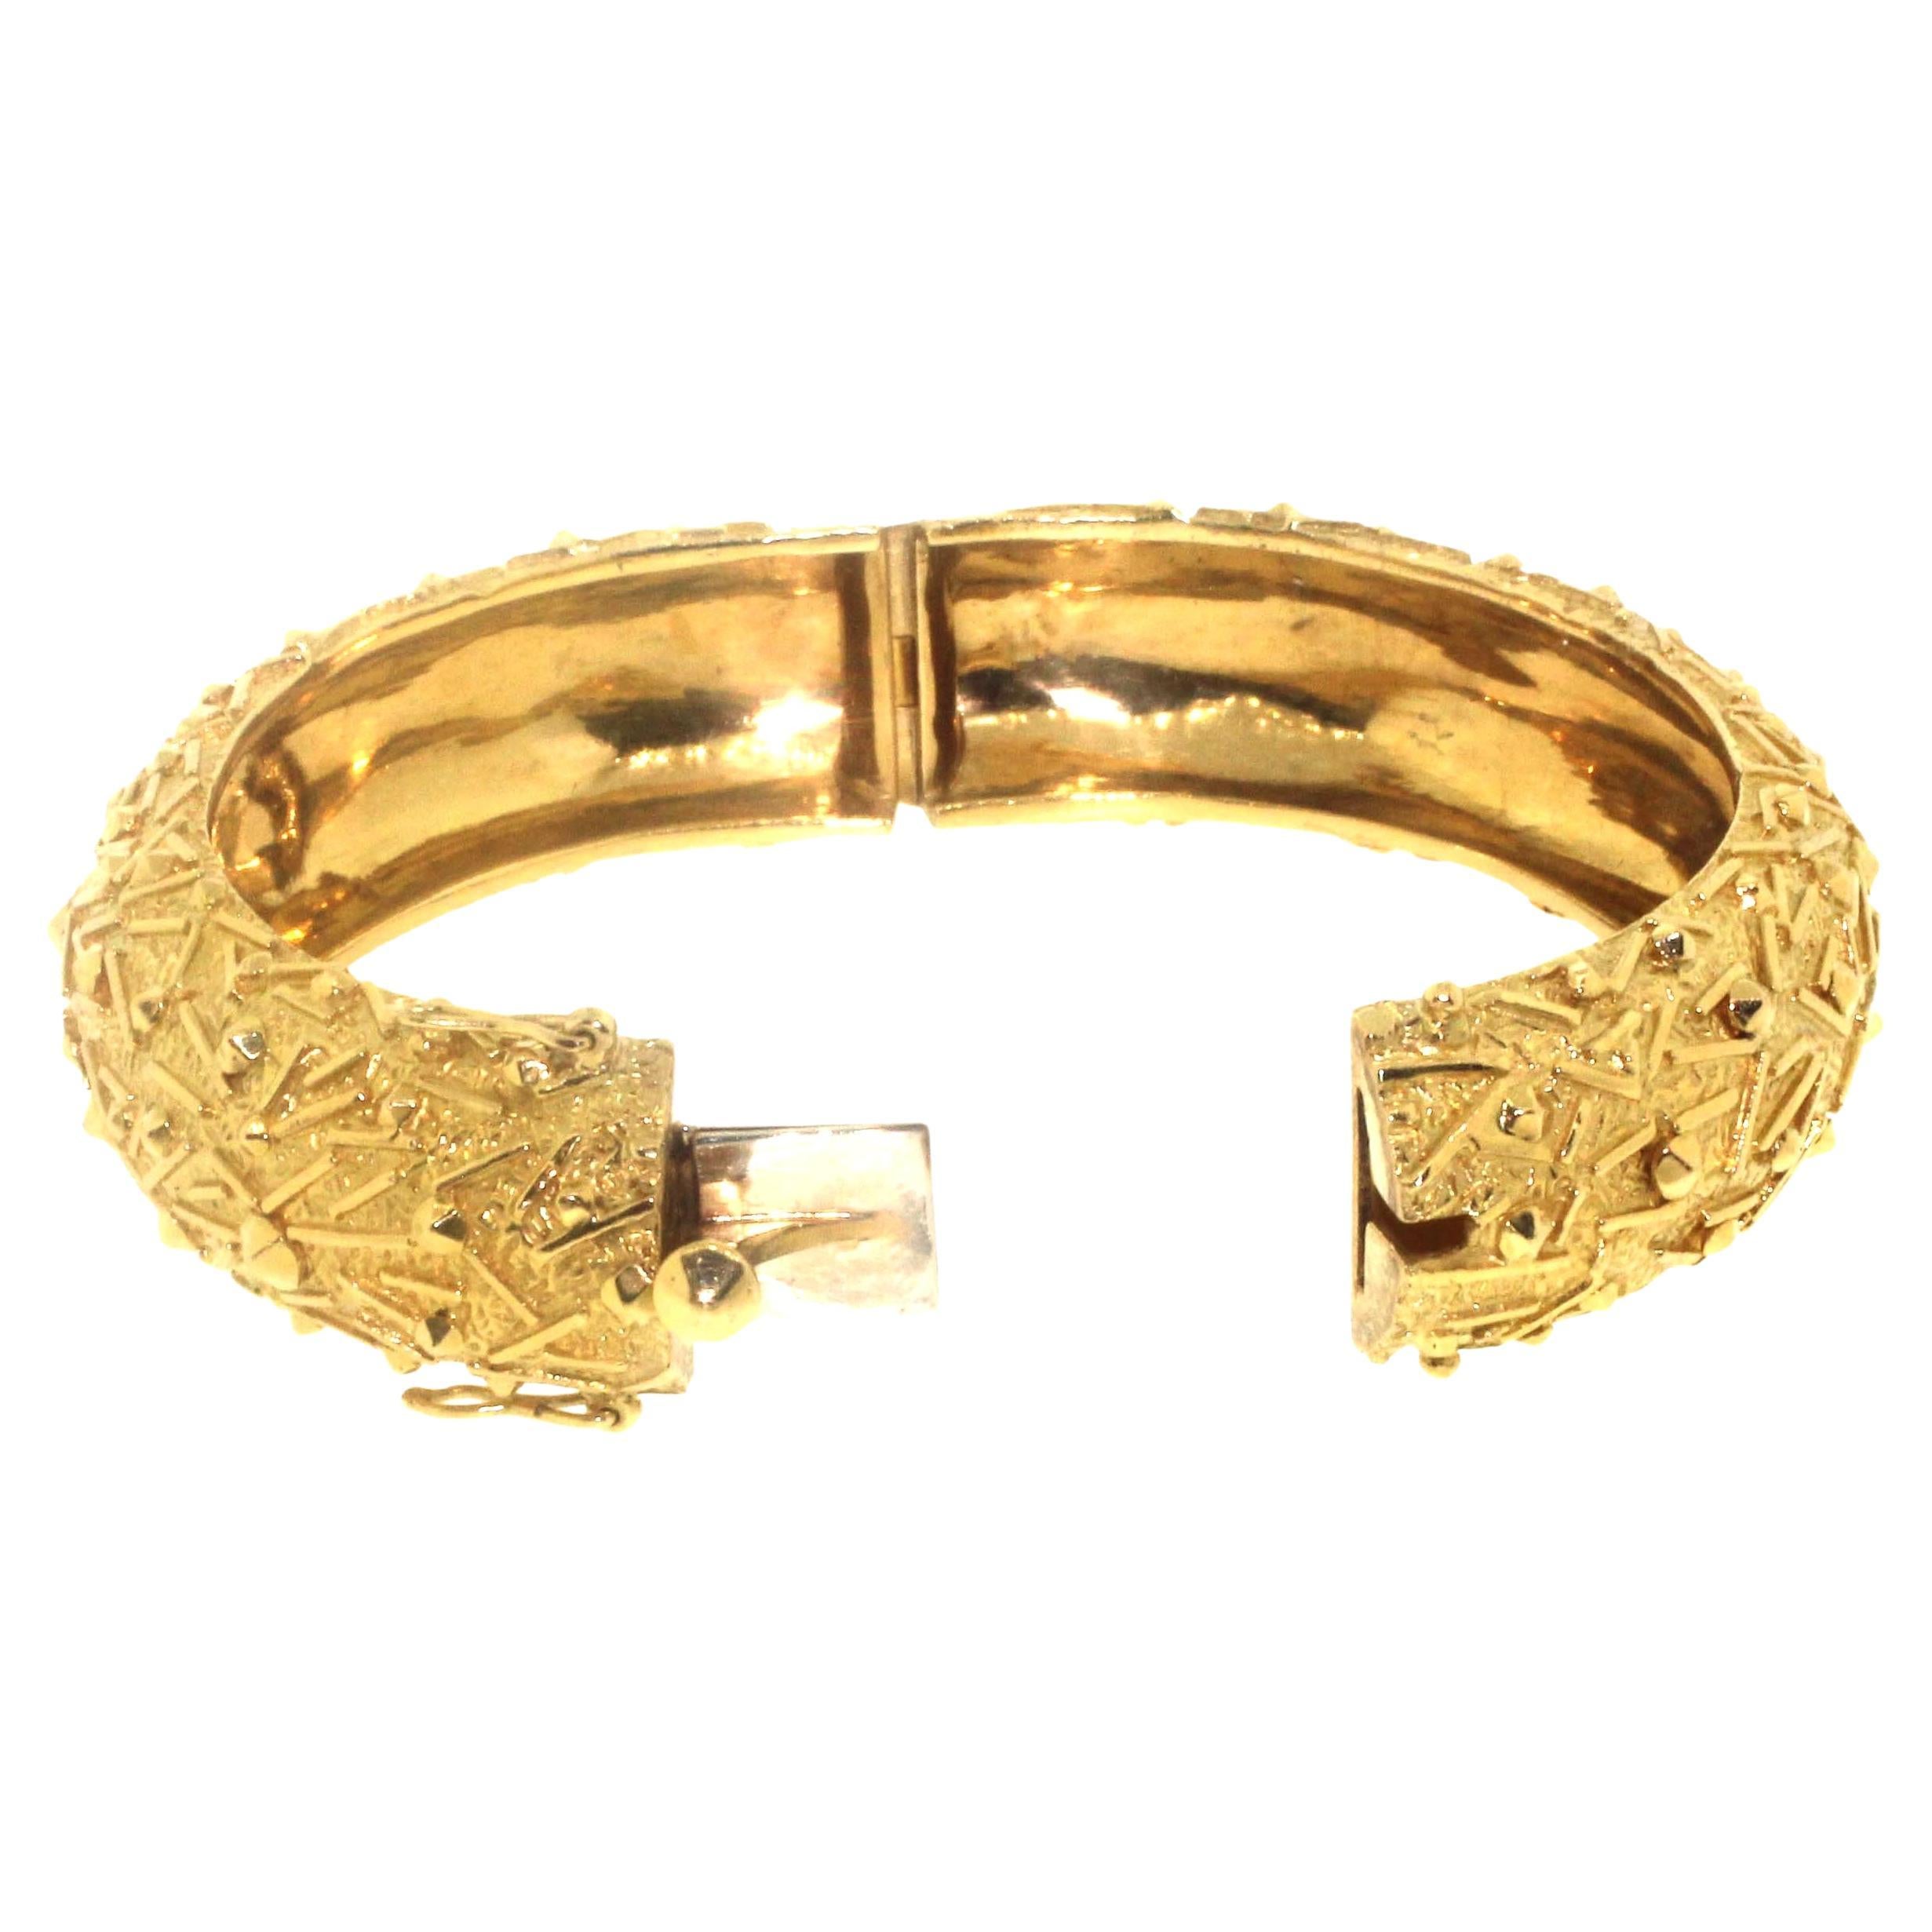 Jewel Of Ocean Estate Bangle Bracelet
18K Yellow Gold  
Weight (g): 61.4
Maker: Estate
Signature: 18K Italy TI  FFA  NY
Estimated Manufactures Retail Price: $35,200
Excellent  Condition
Length 2.5